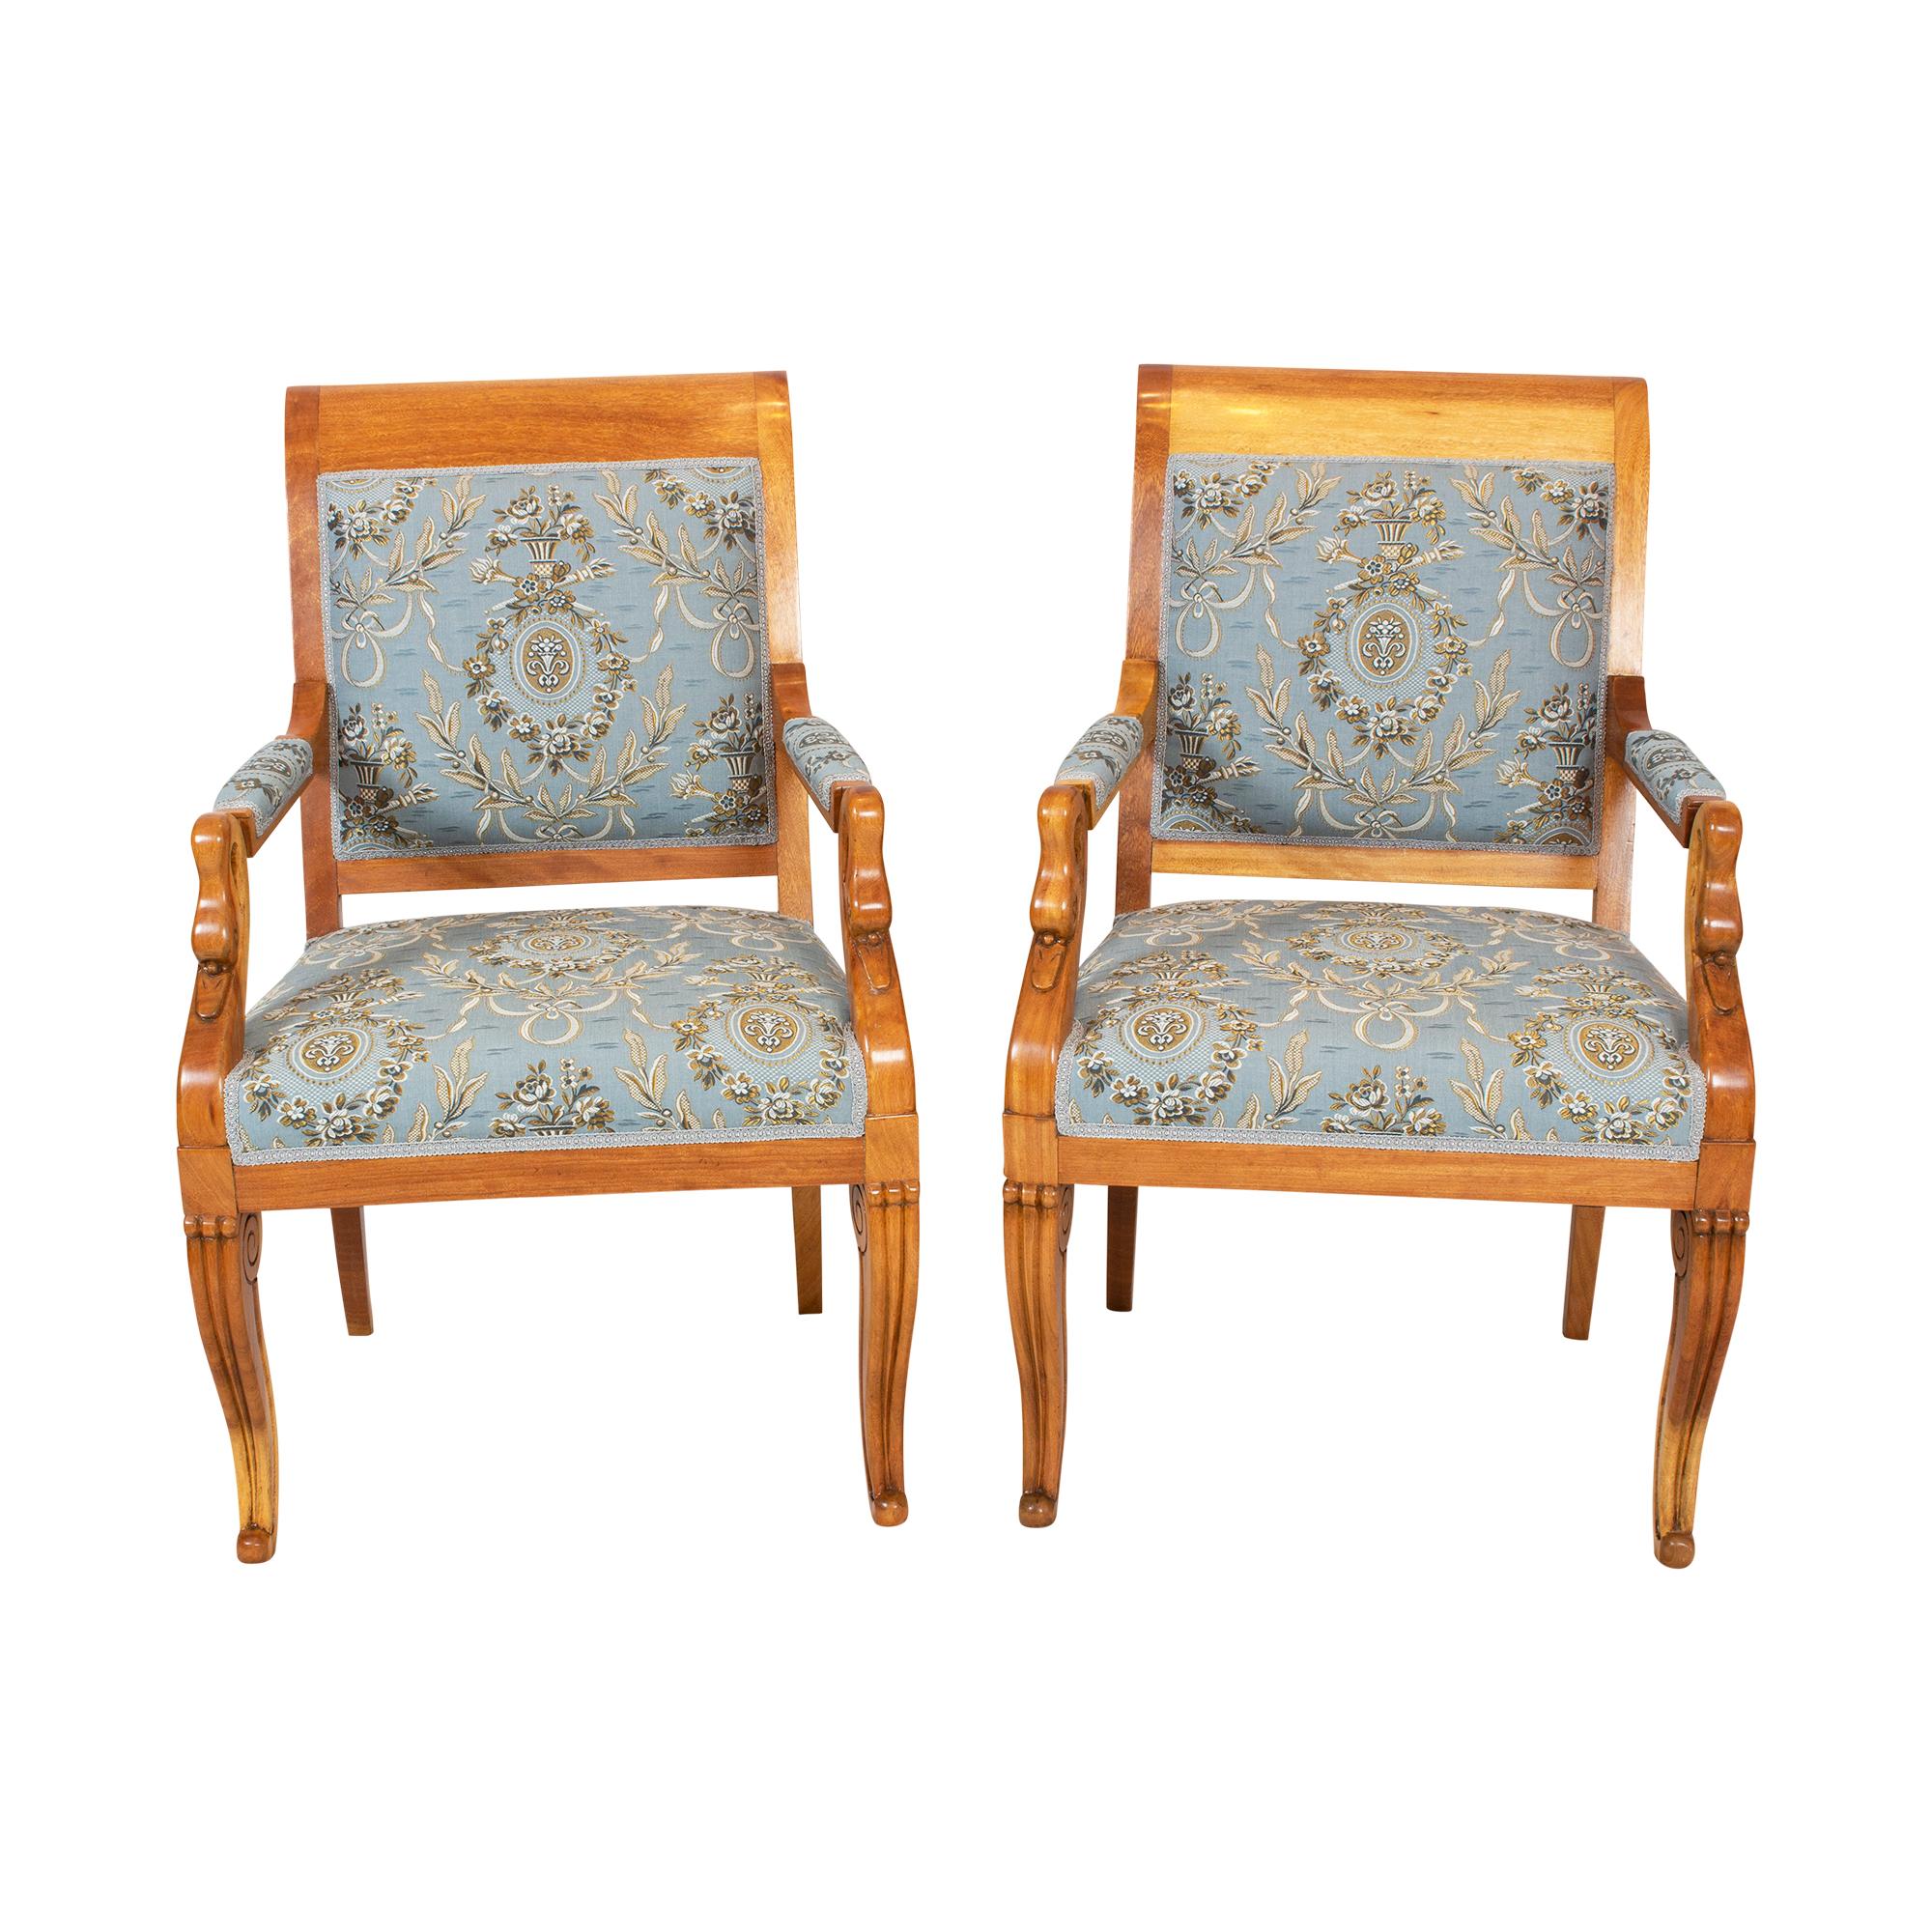 Early 19th Century Pair of Empire / Biedermeier Solid Plum Wood Swan Armchairs For Sale 4